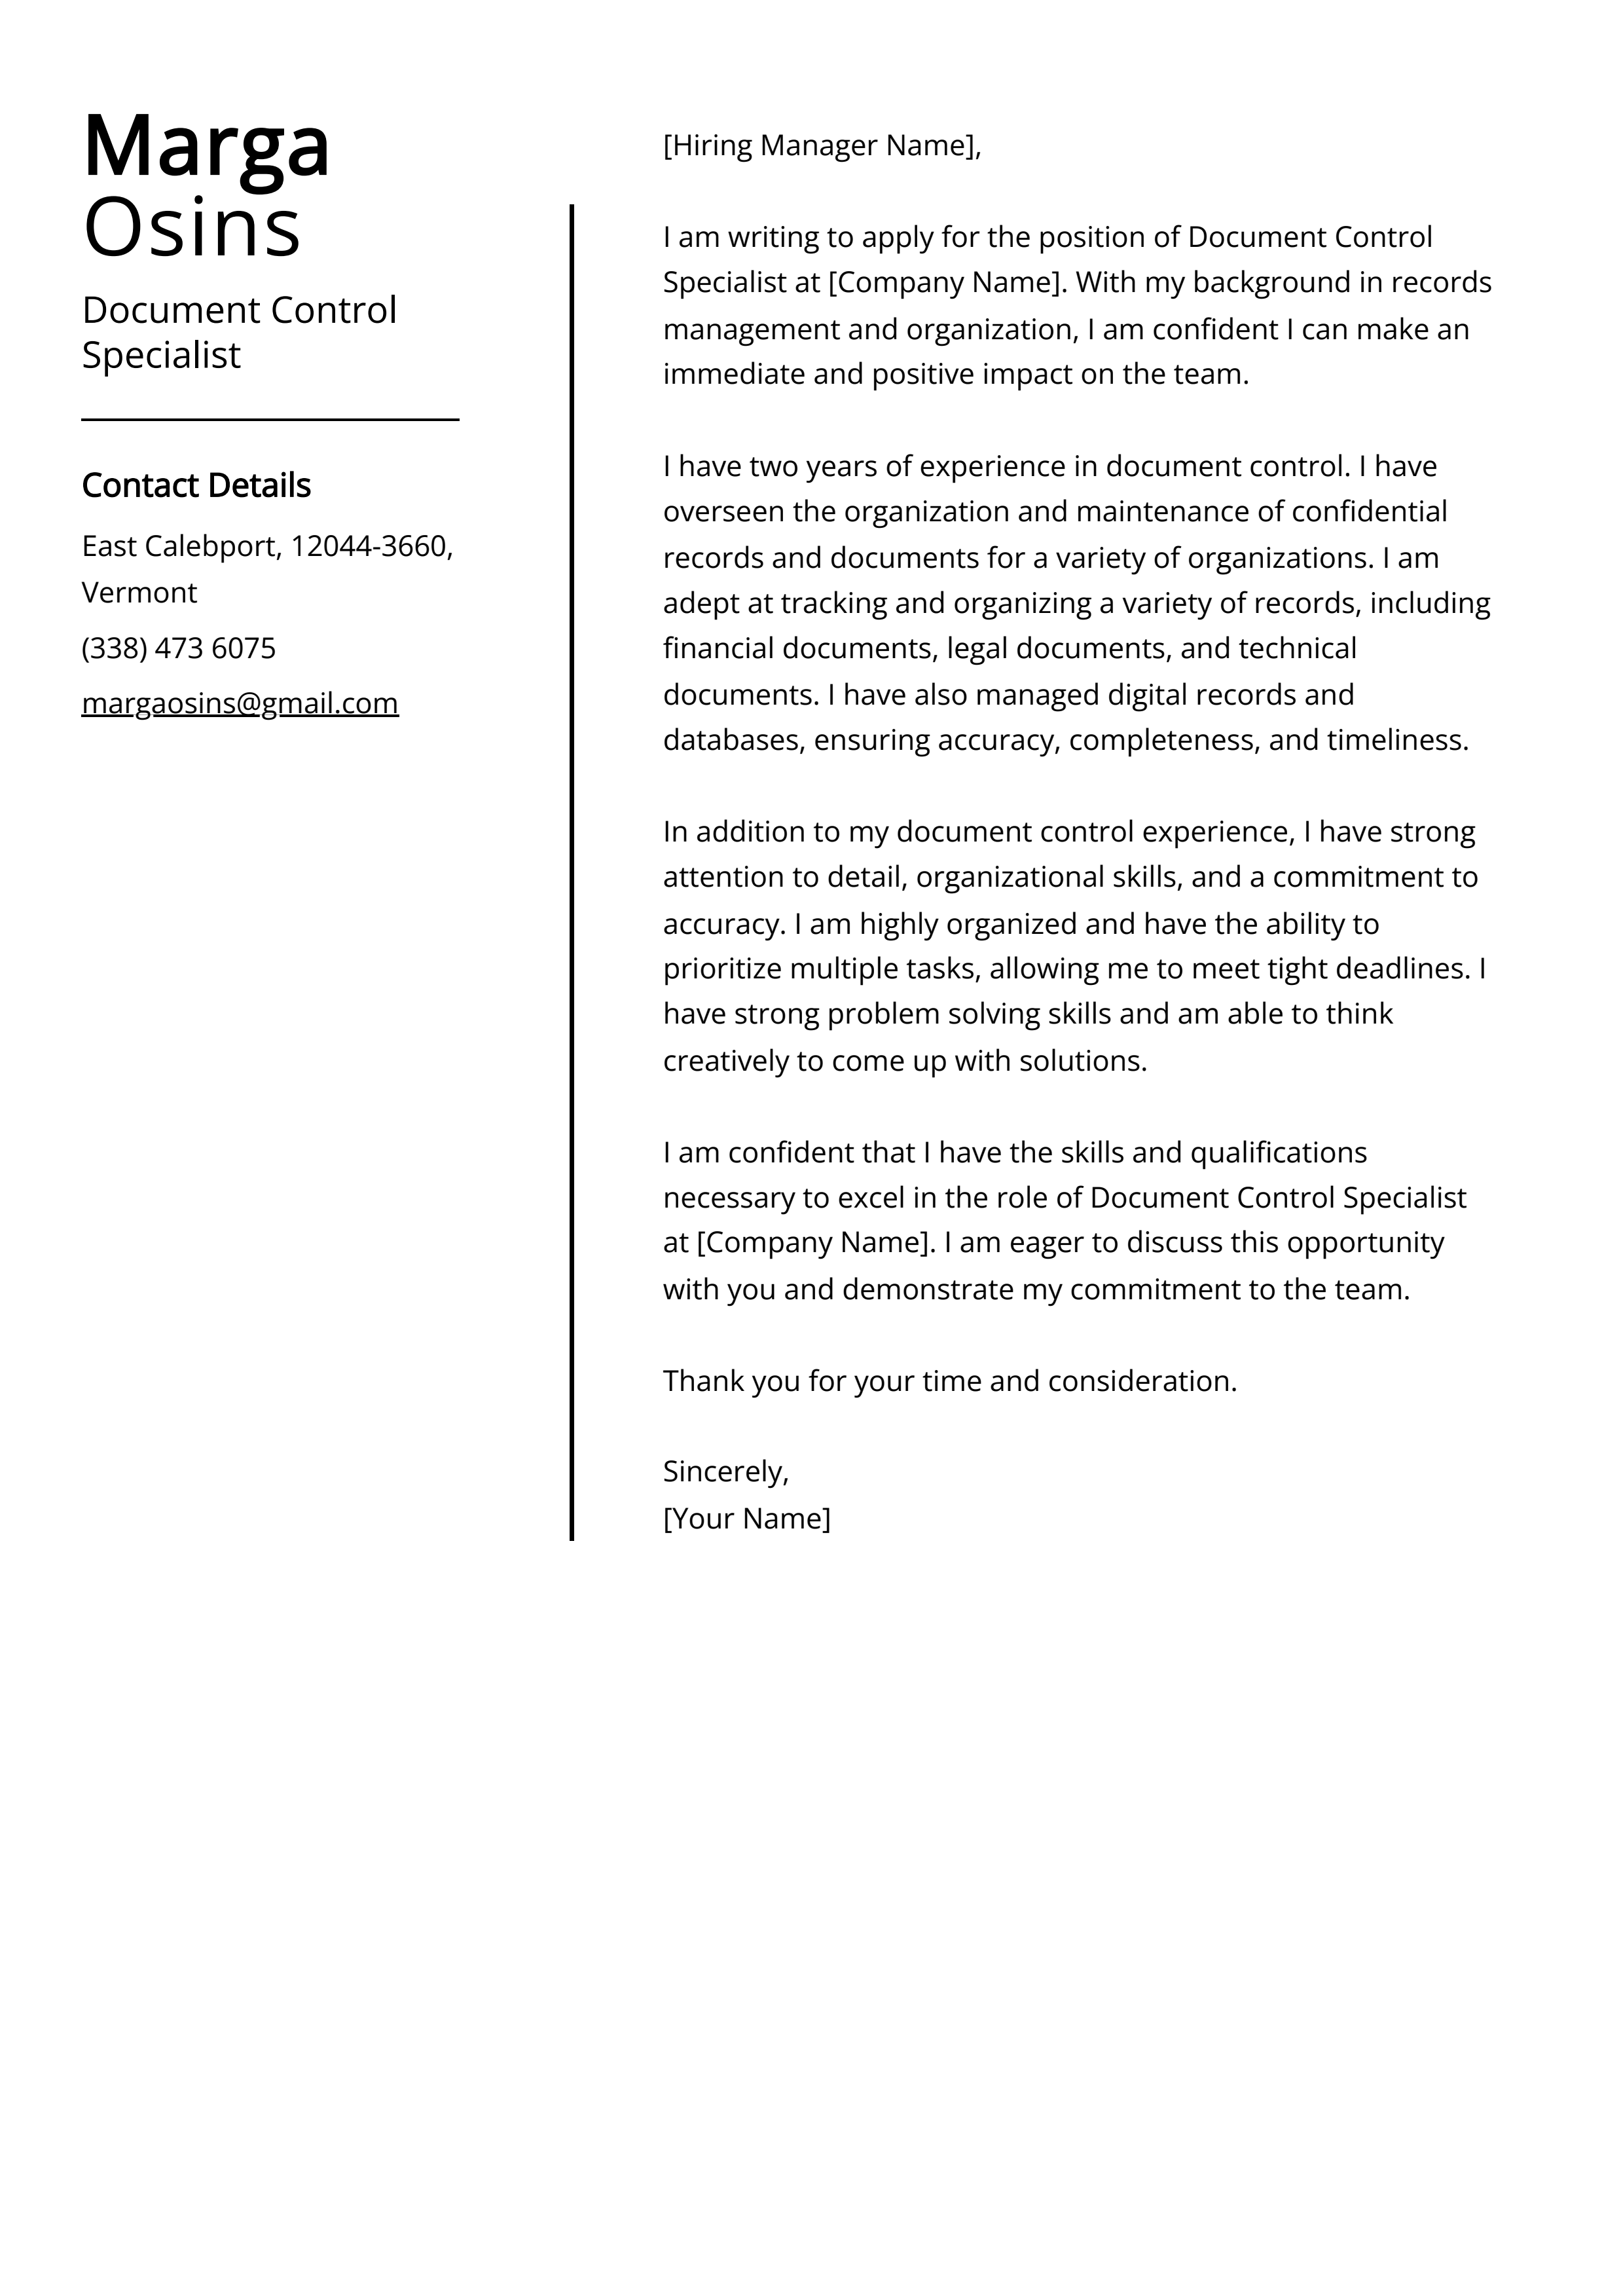 Document Control Specialist Cover Letter Example